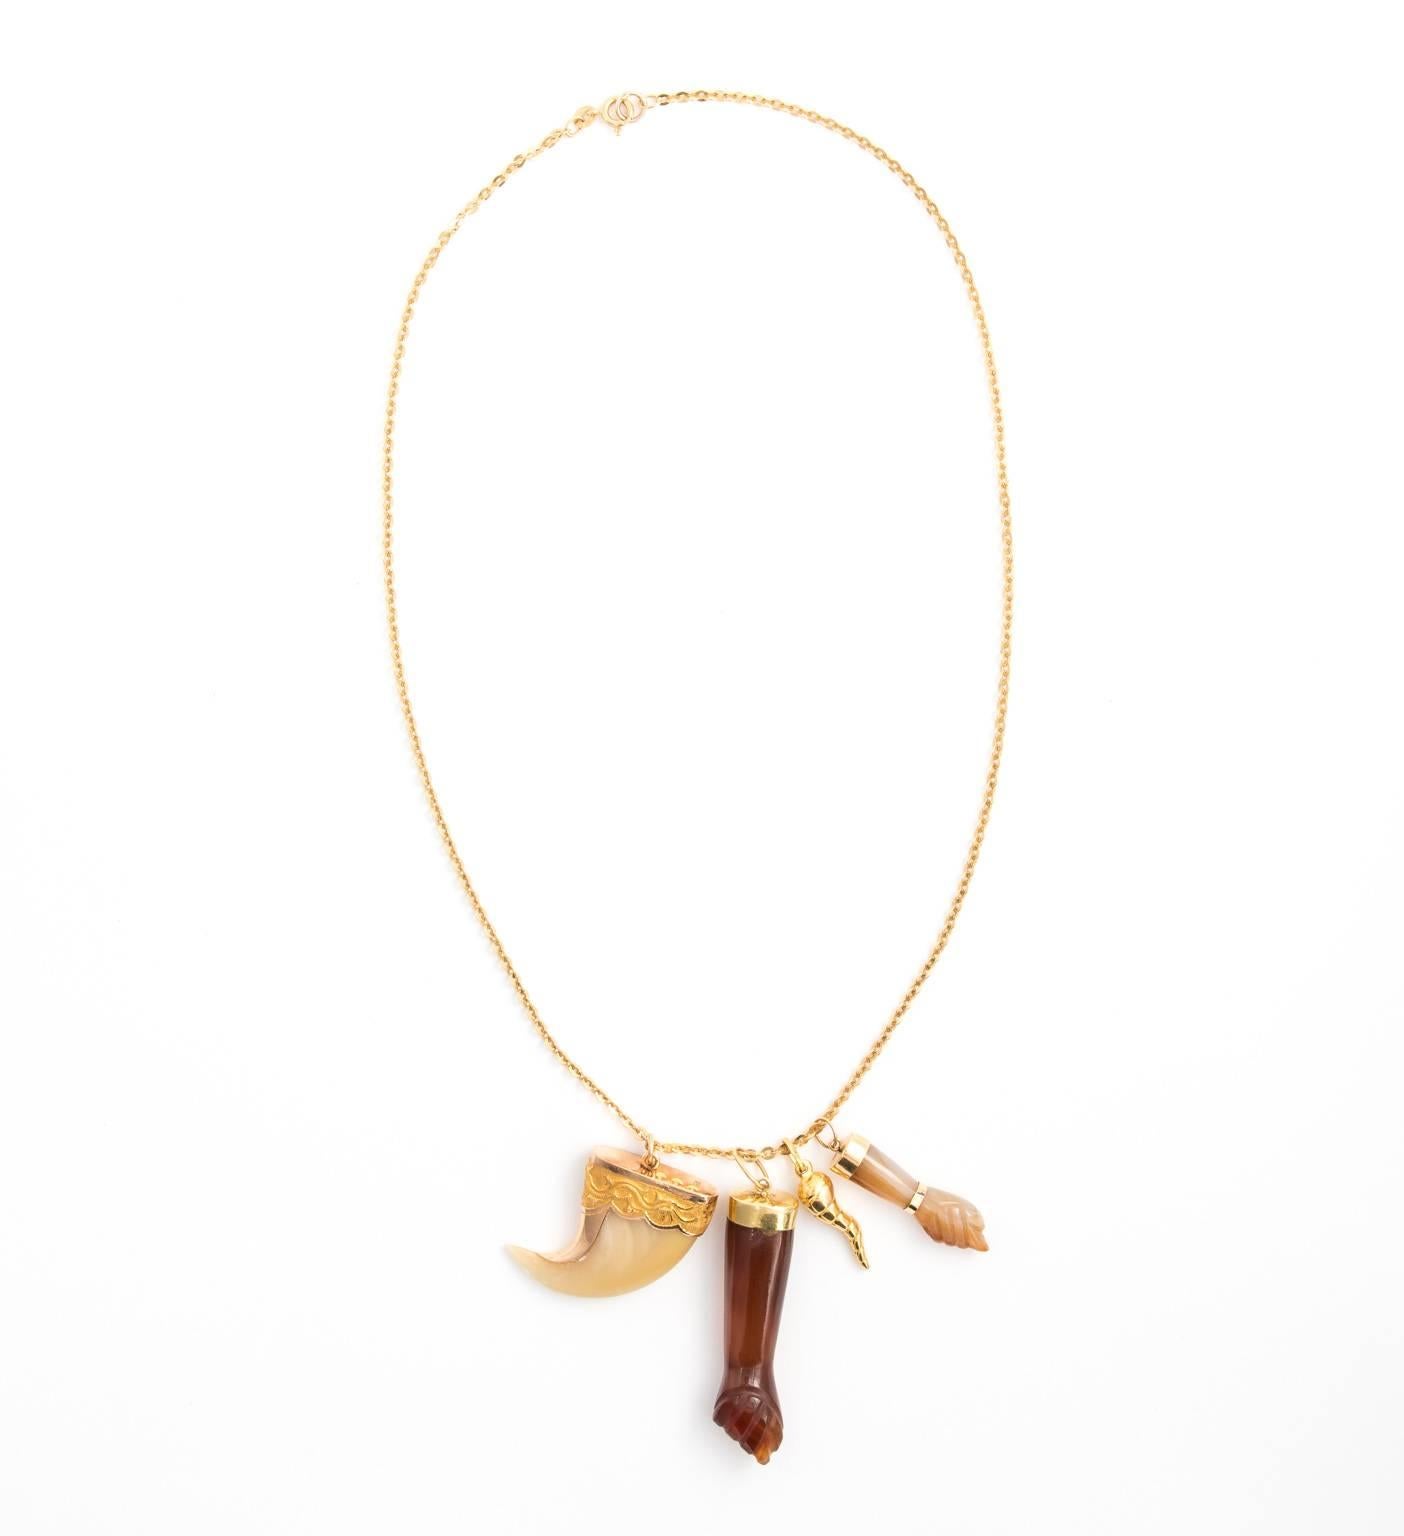 Late Victorian assemblage necklace consisting of an 18kt gold chain, agate figure charms, a whalebone pendant, and an 18kt fluted horn charm.